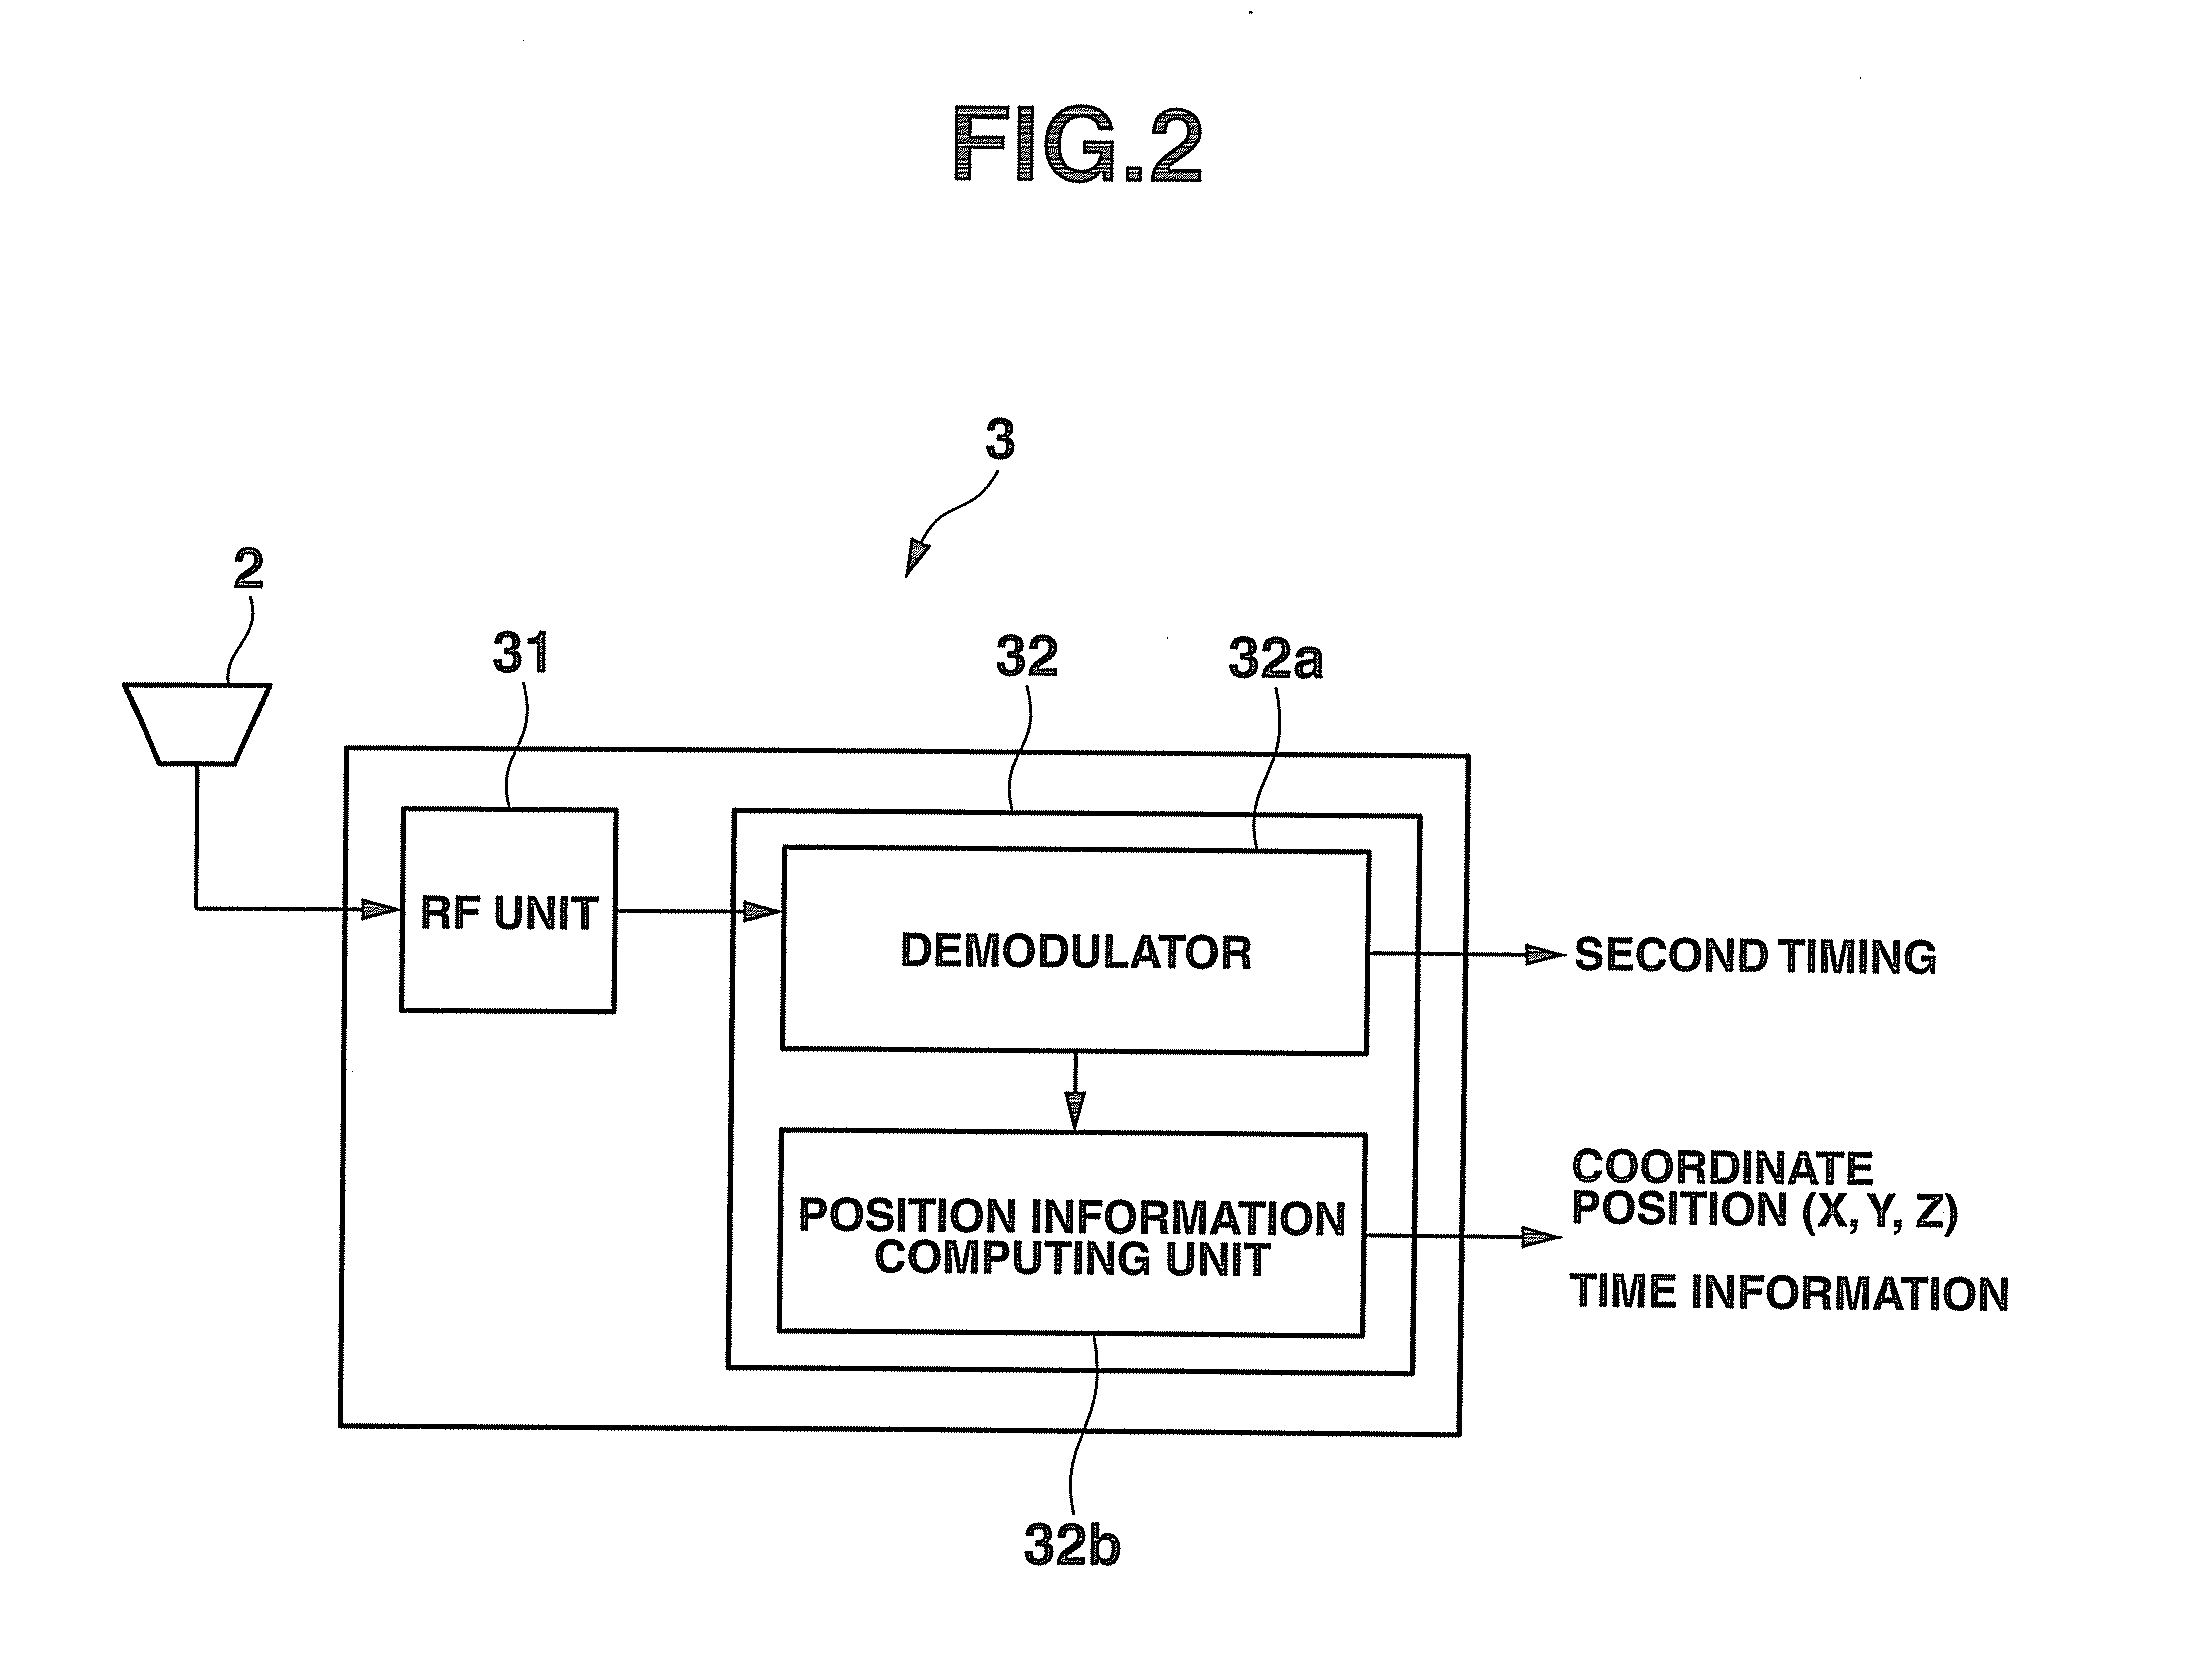 GPS clocking device and time detection method